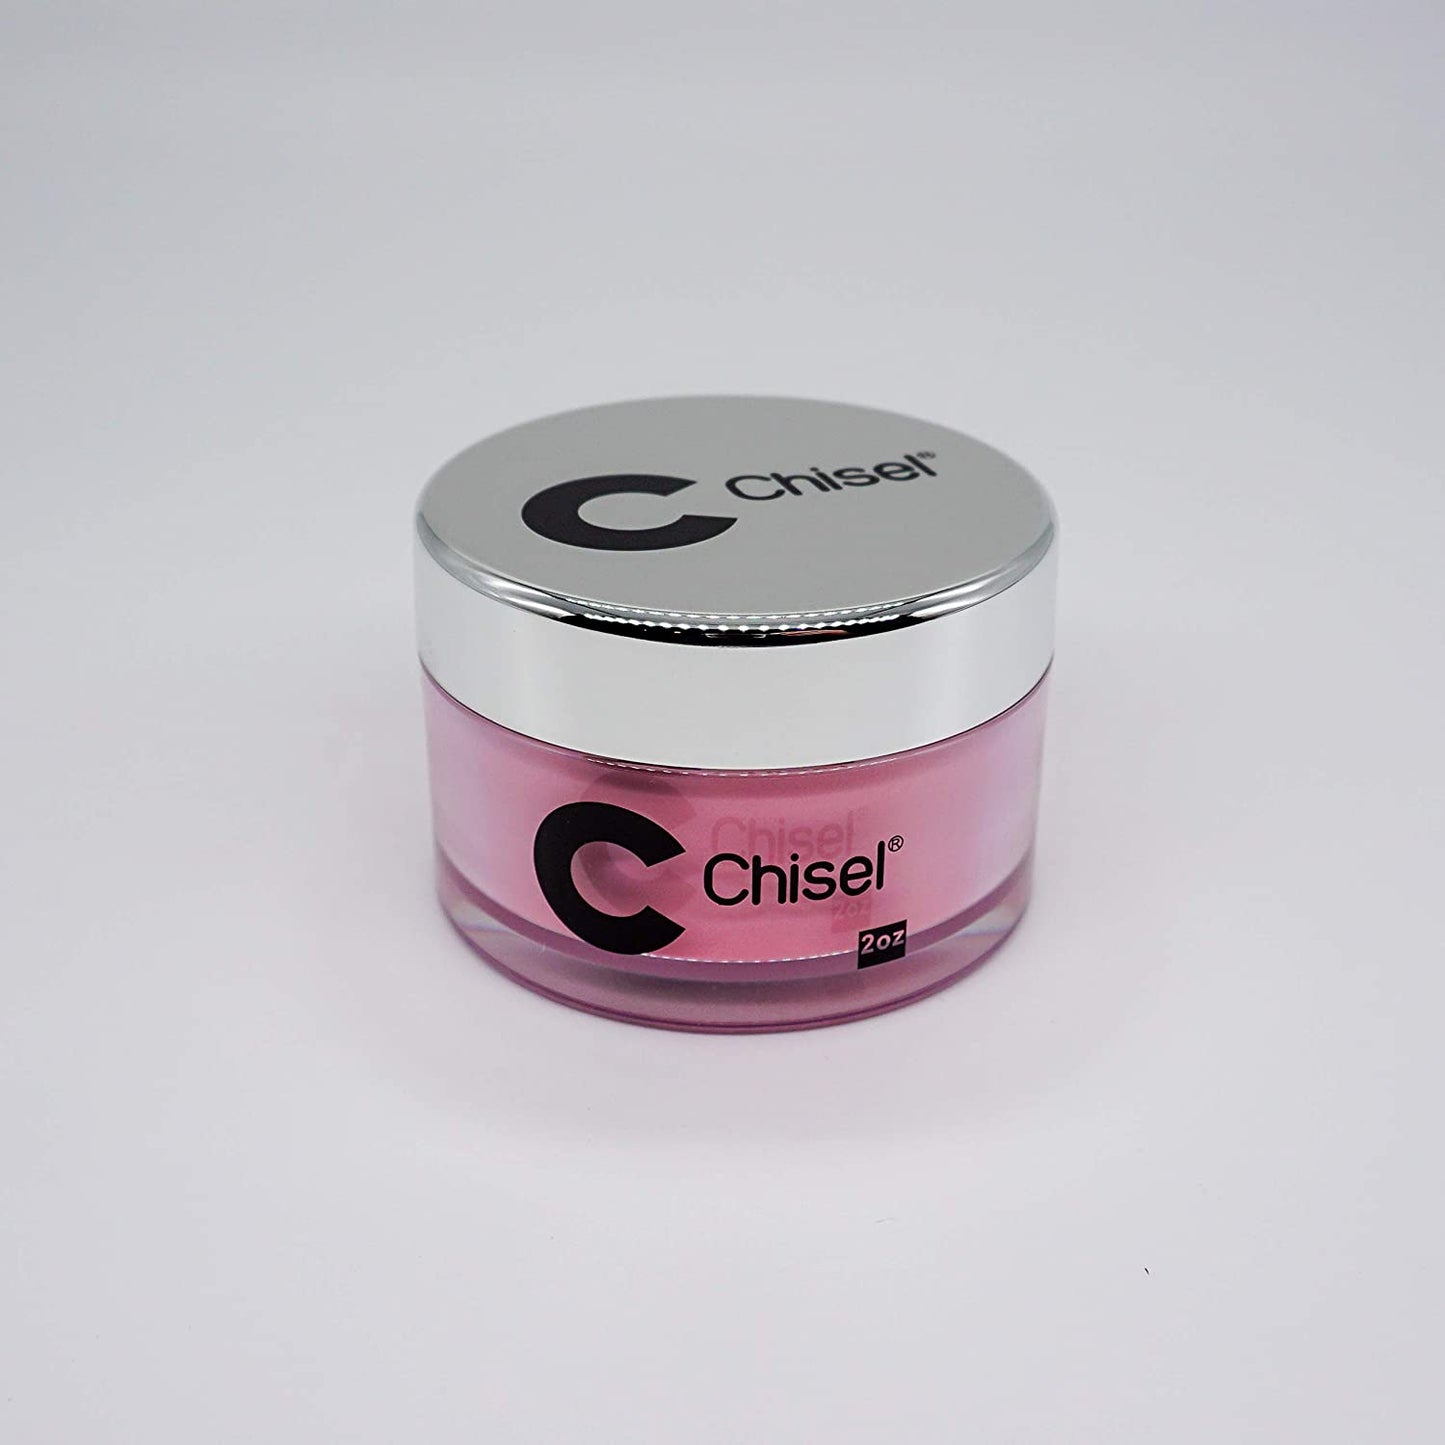 Chisel Nail Art Manicure 2 in 1 Acrylic & Dipping Powder Solid #020